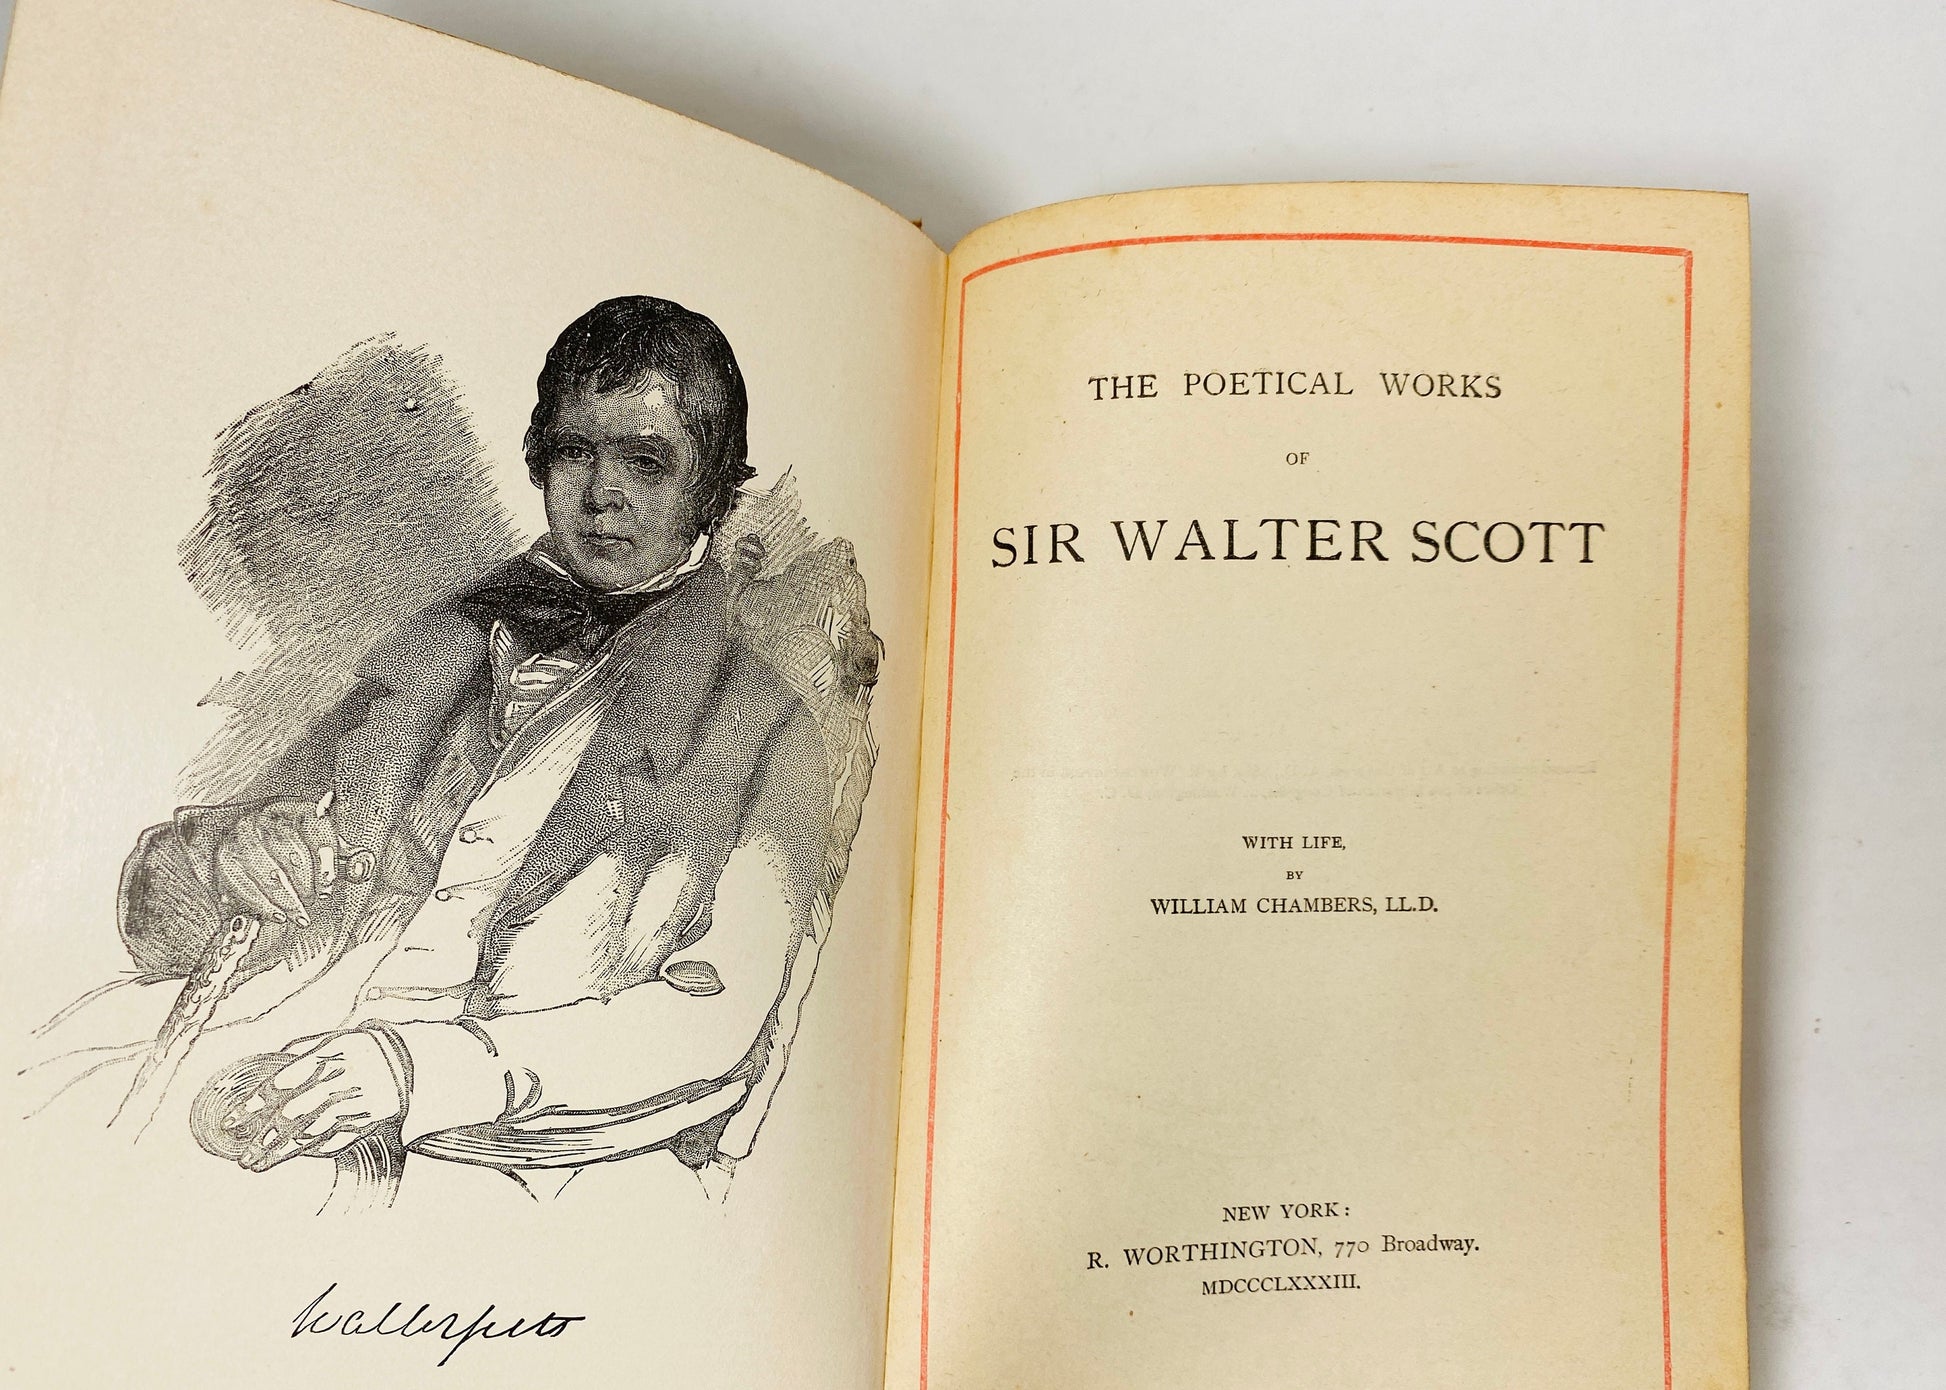 Poetical Works of Sir Walter Scott Vintage book circa 1883 141 years old! Marmion, Lady of the Lake, Lay of Last Minstrel